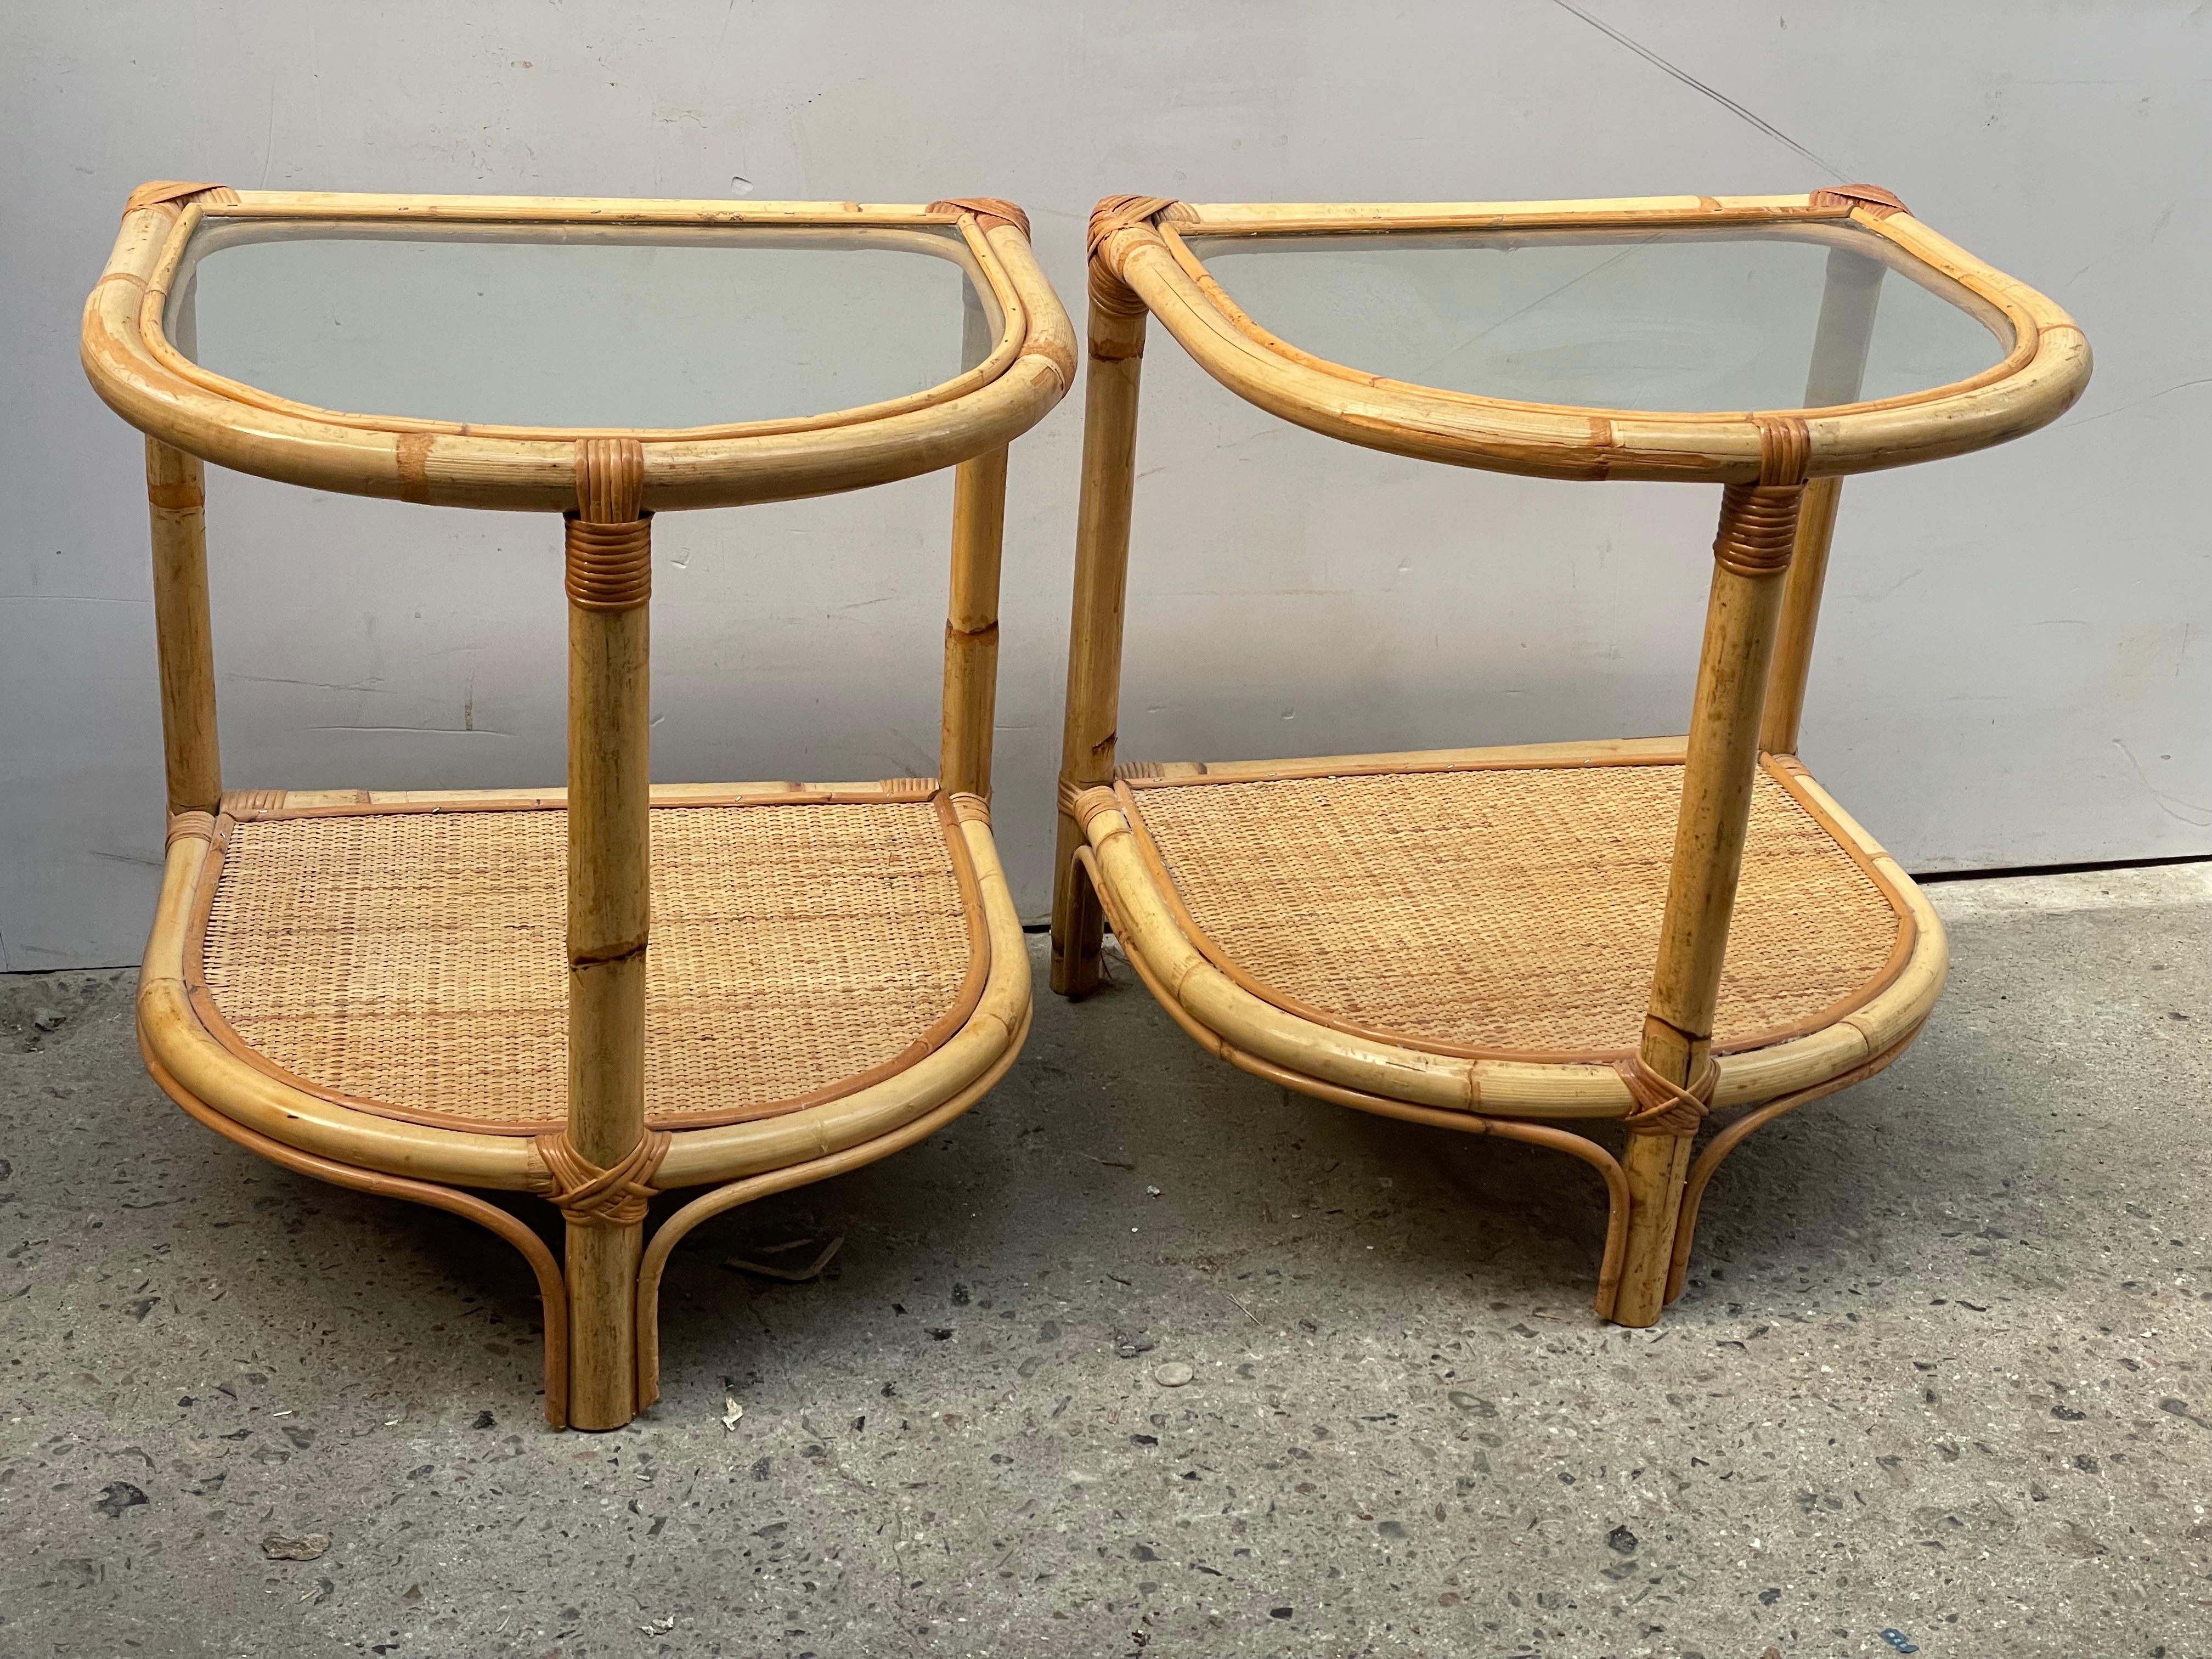 Late 20th Century Vintage bamboo rattan nightstands, crafted in Denmark during the 1970s